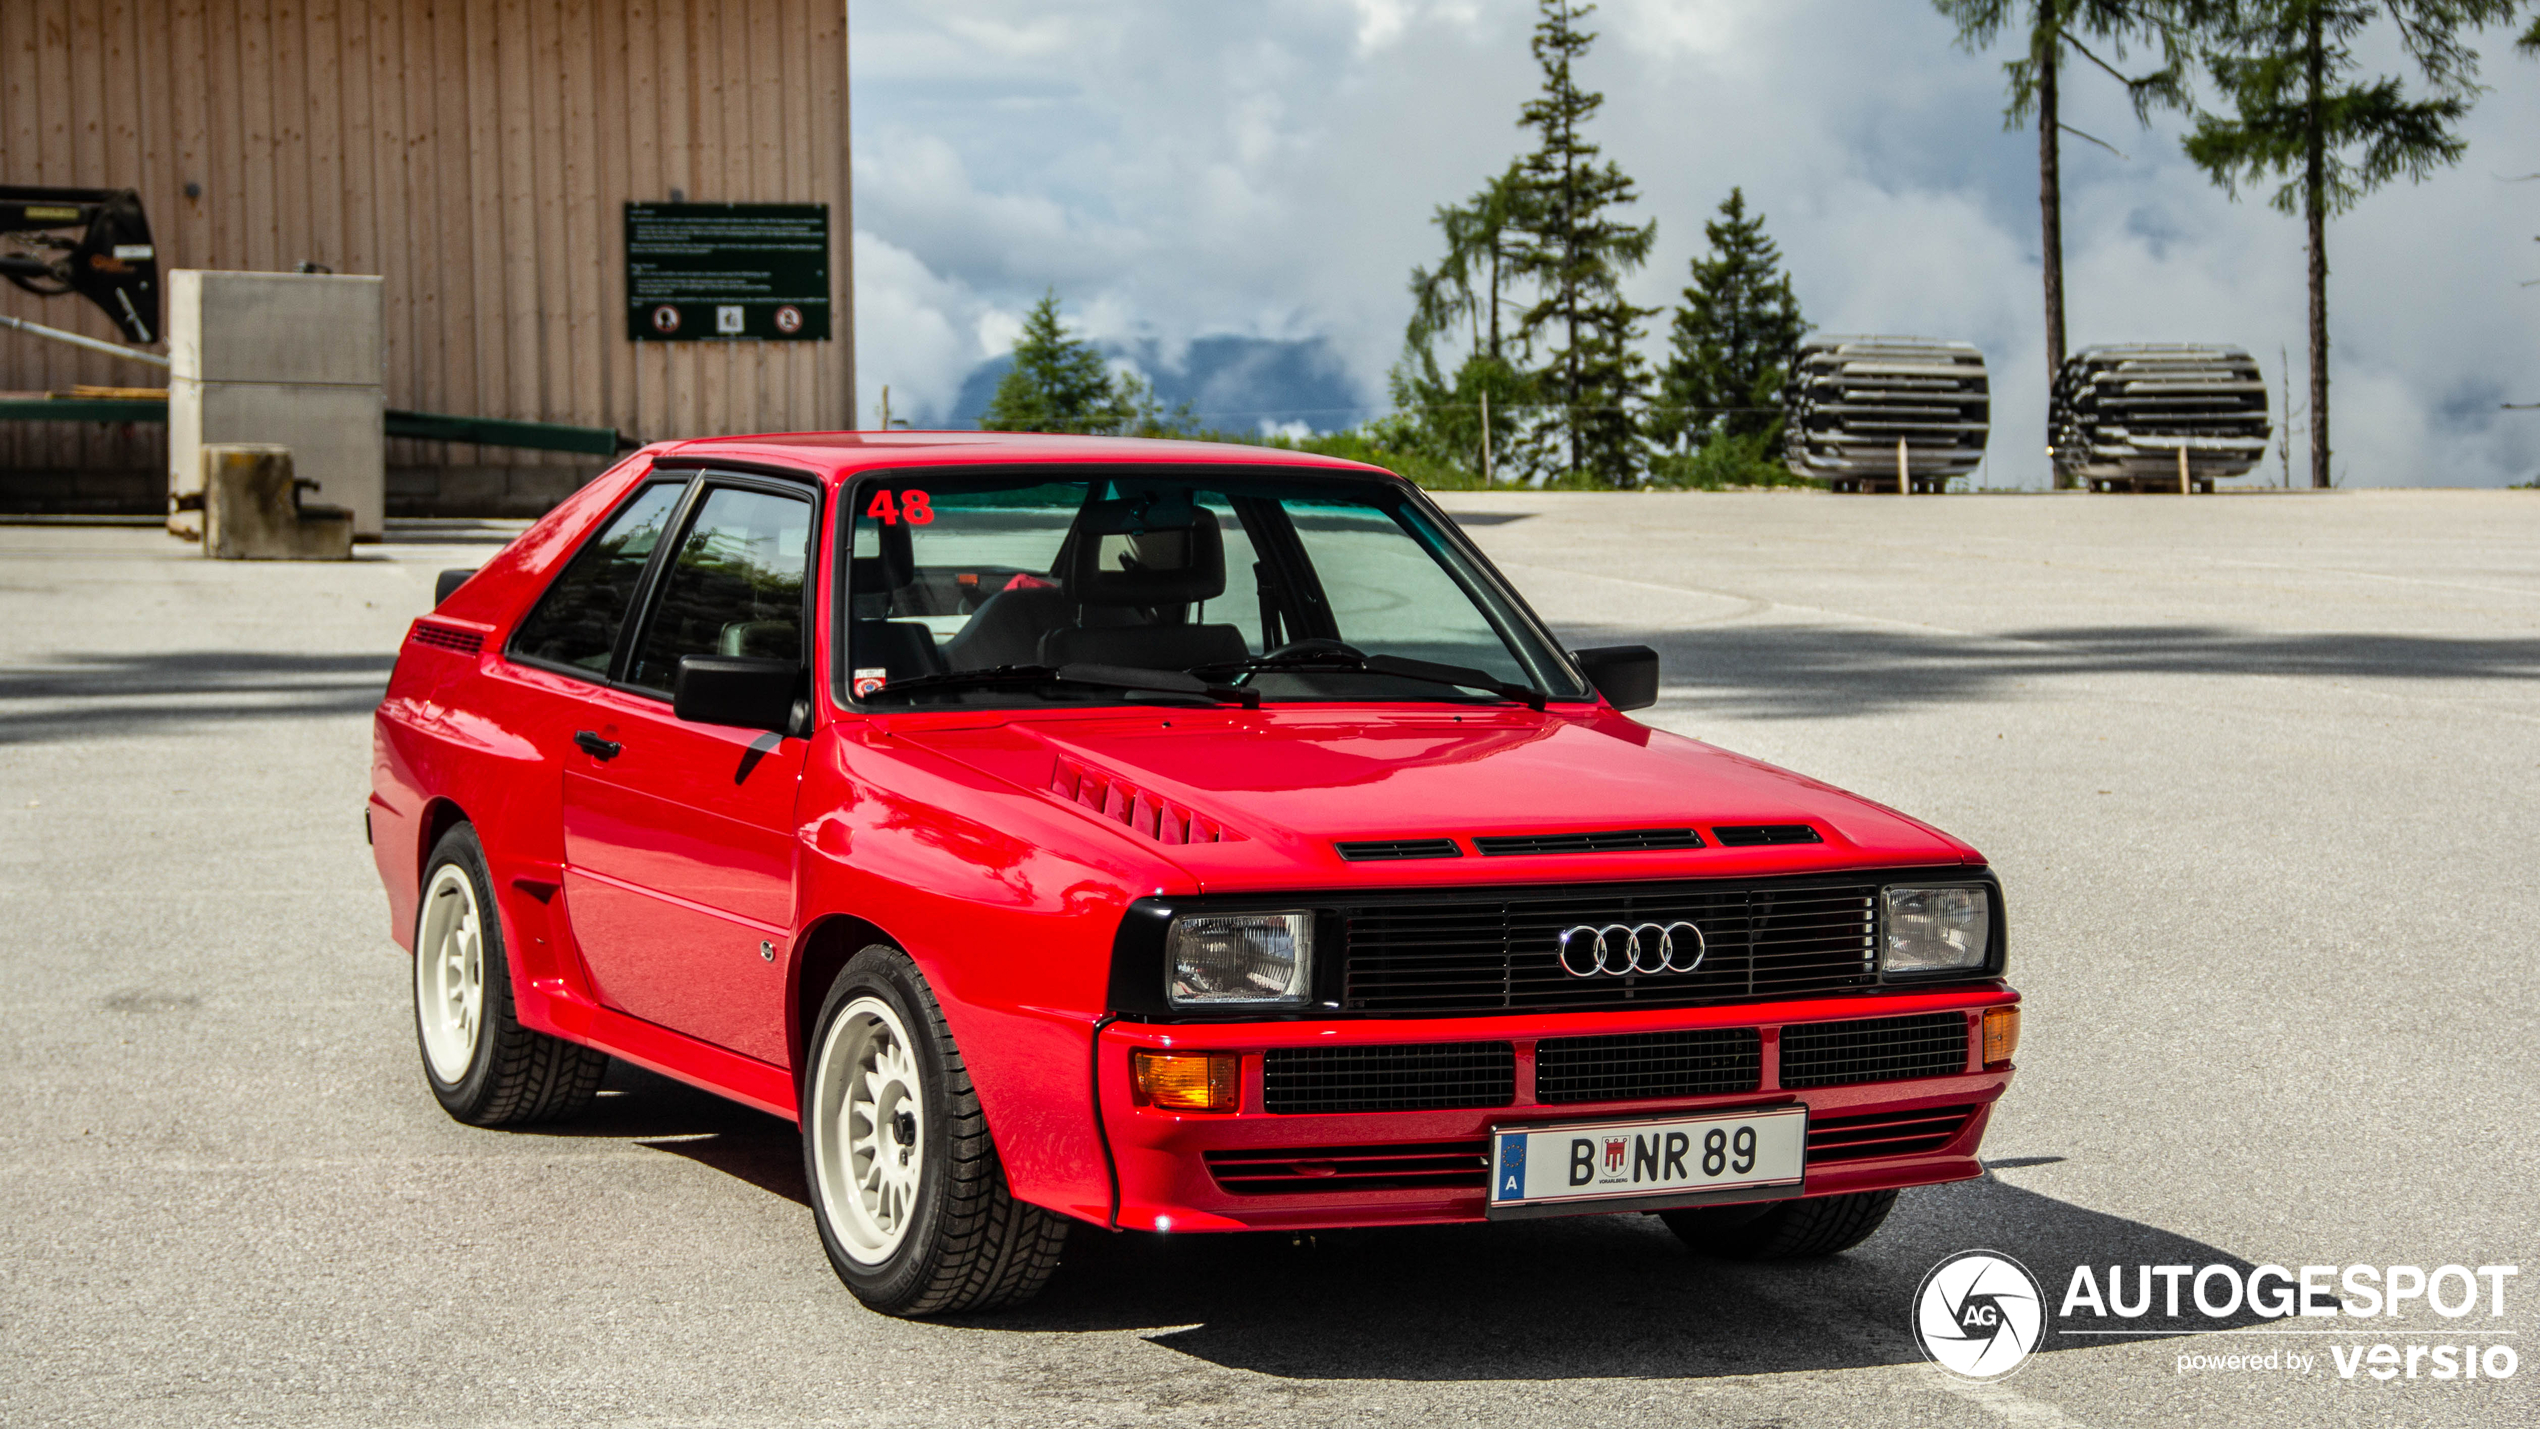 Two legends from audi are photographed in Tauplitz